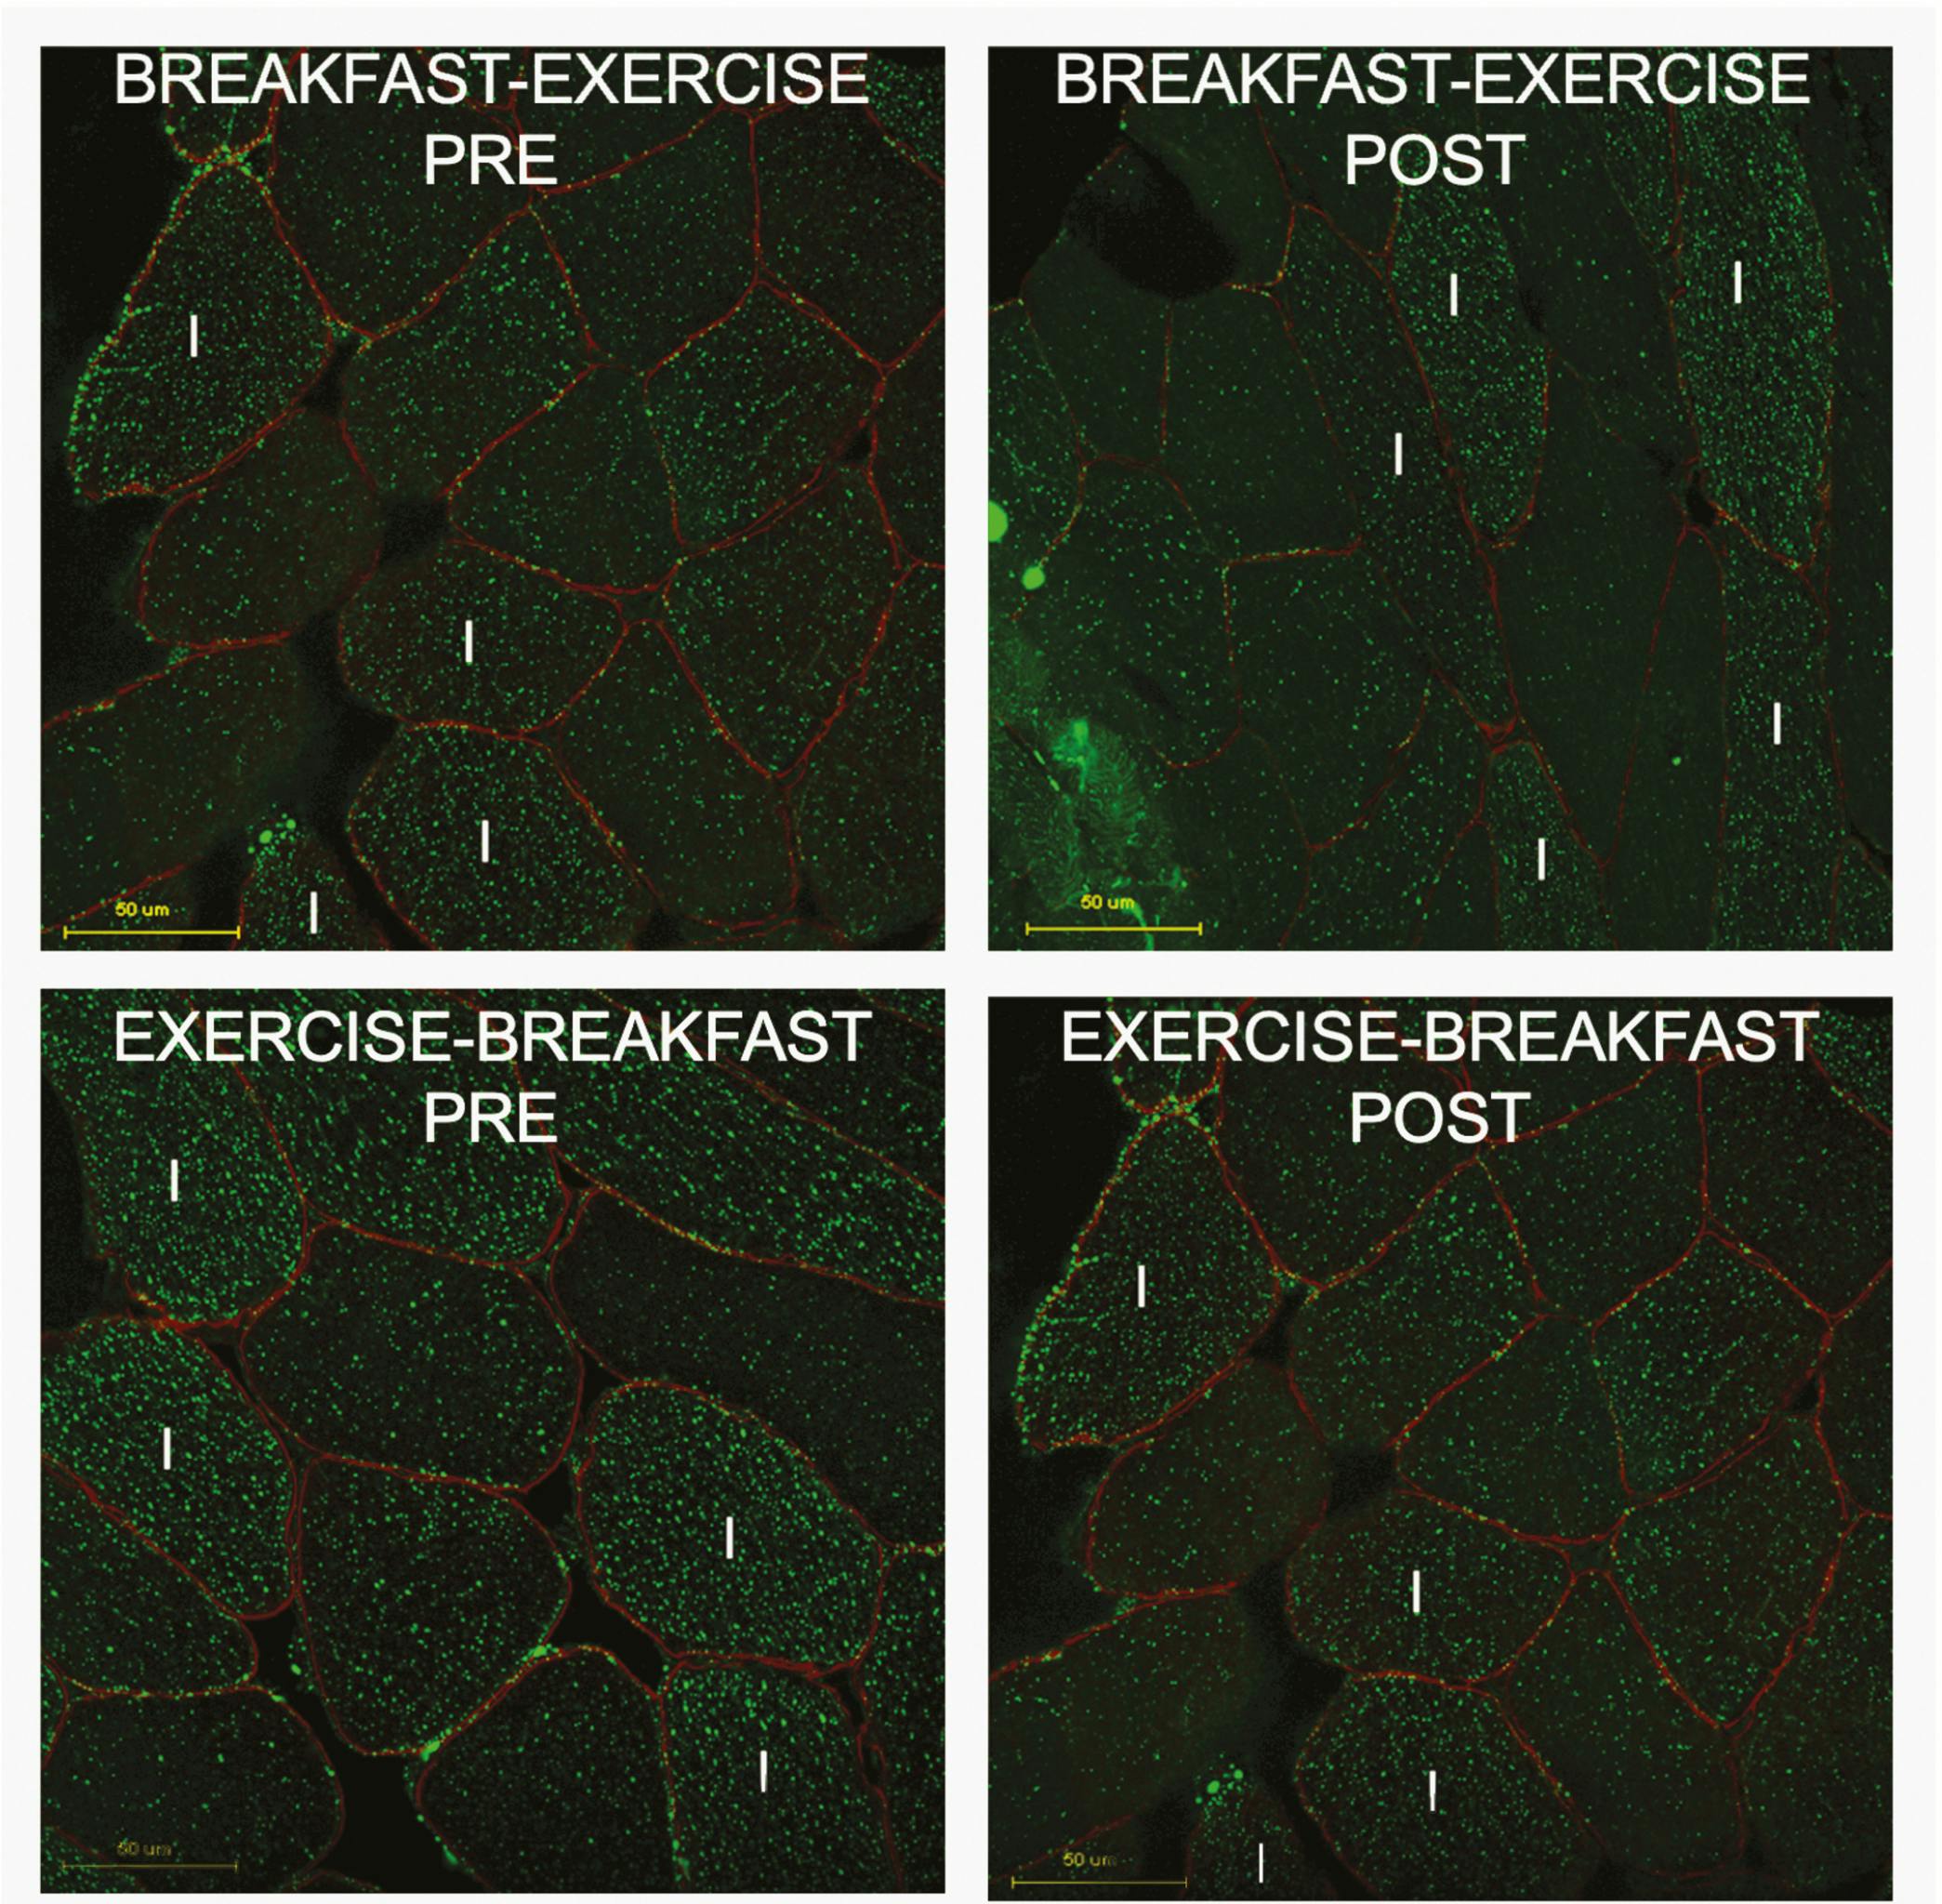 chart depicting exercise before and after breakfast